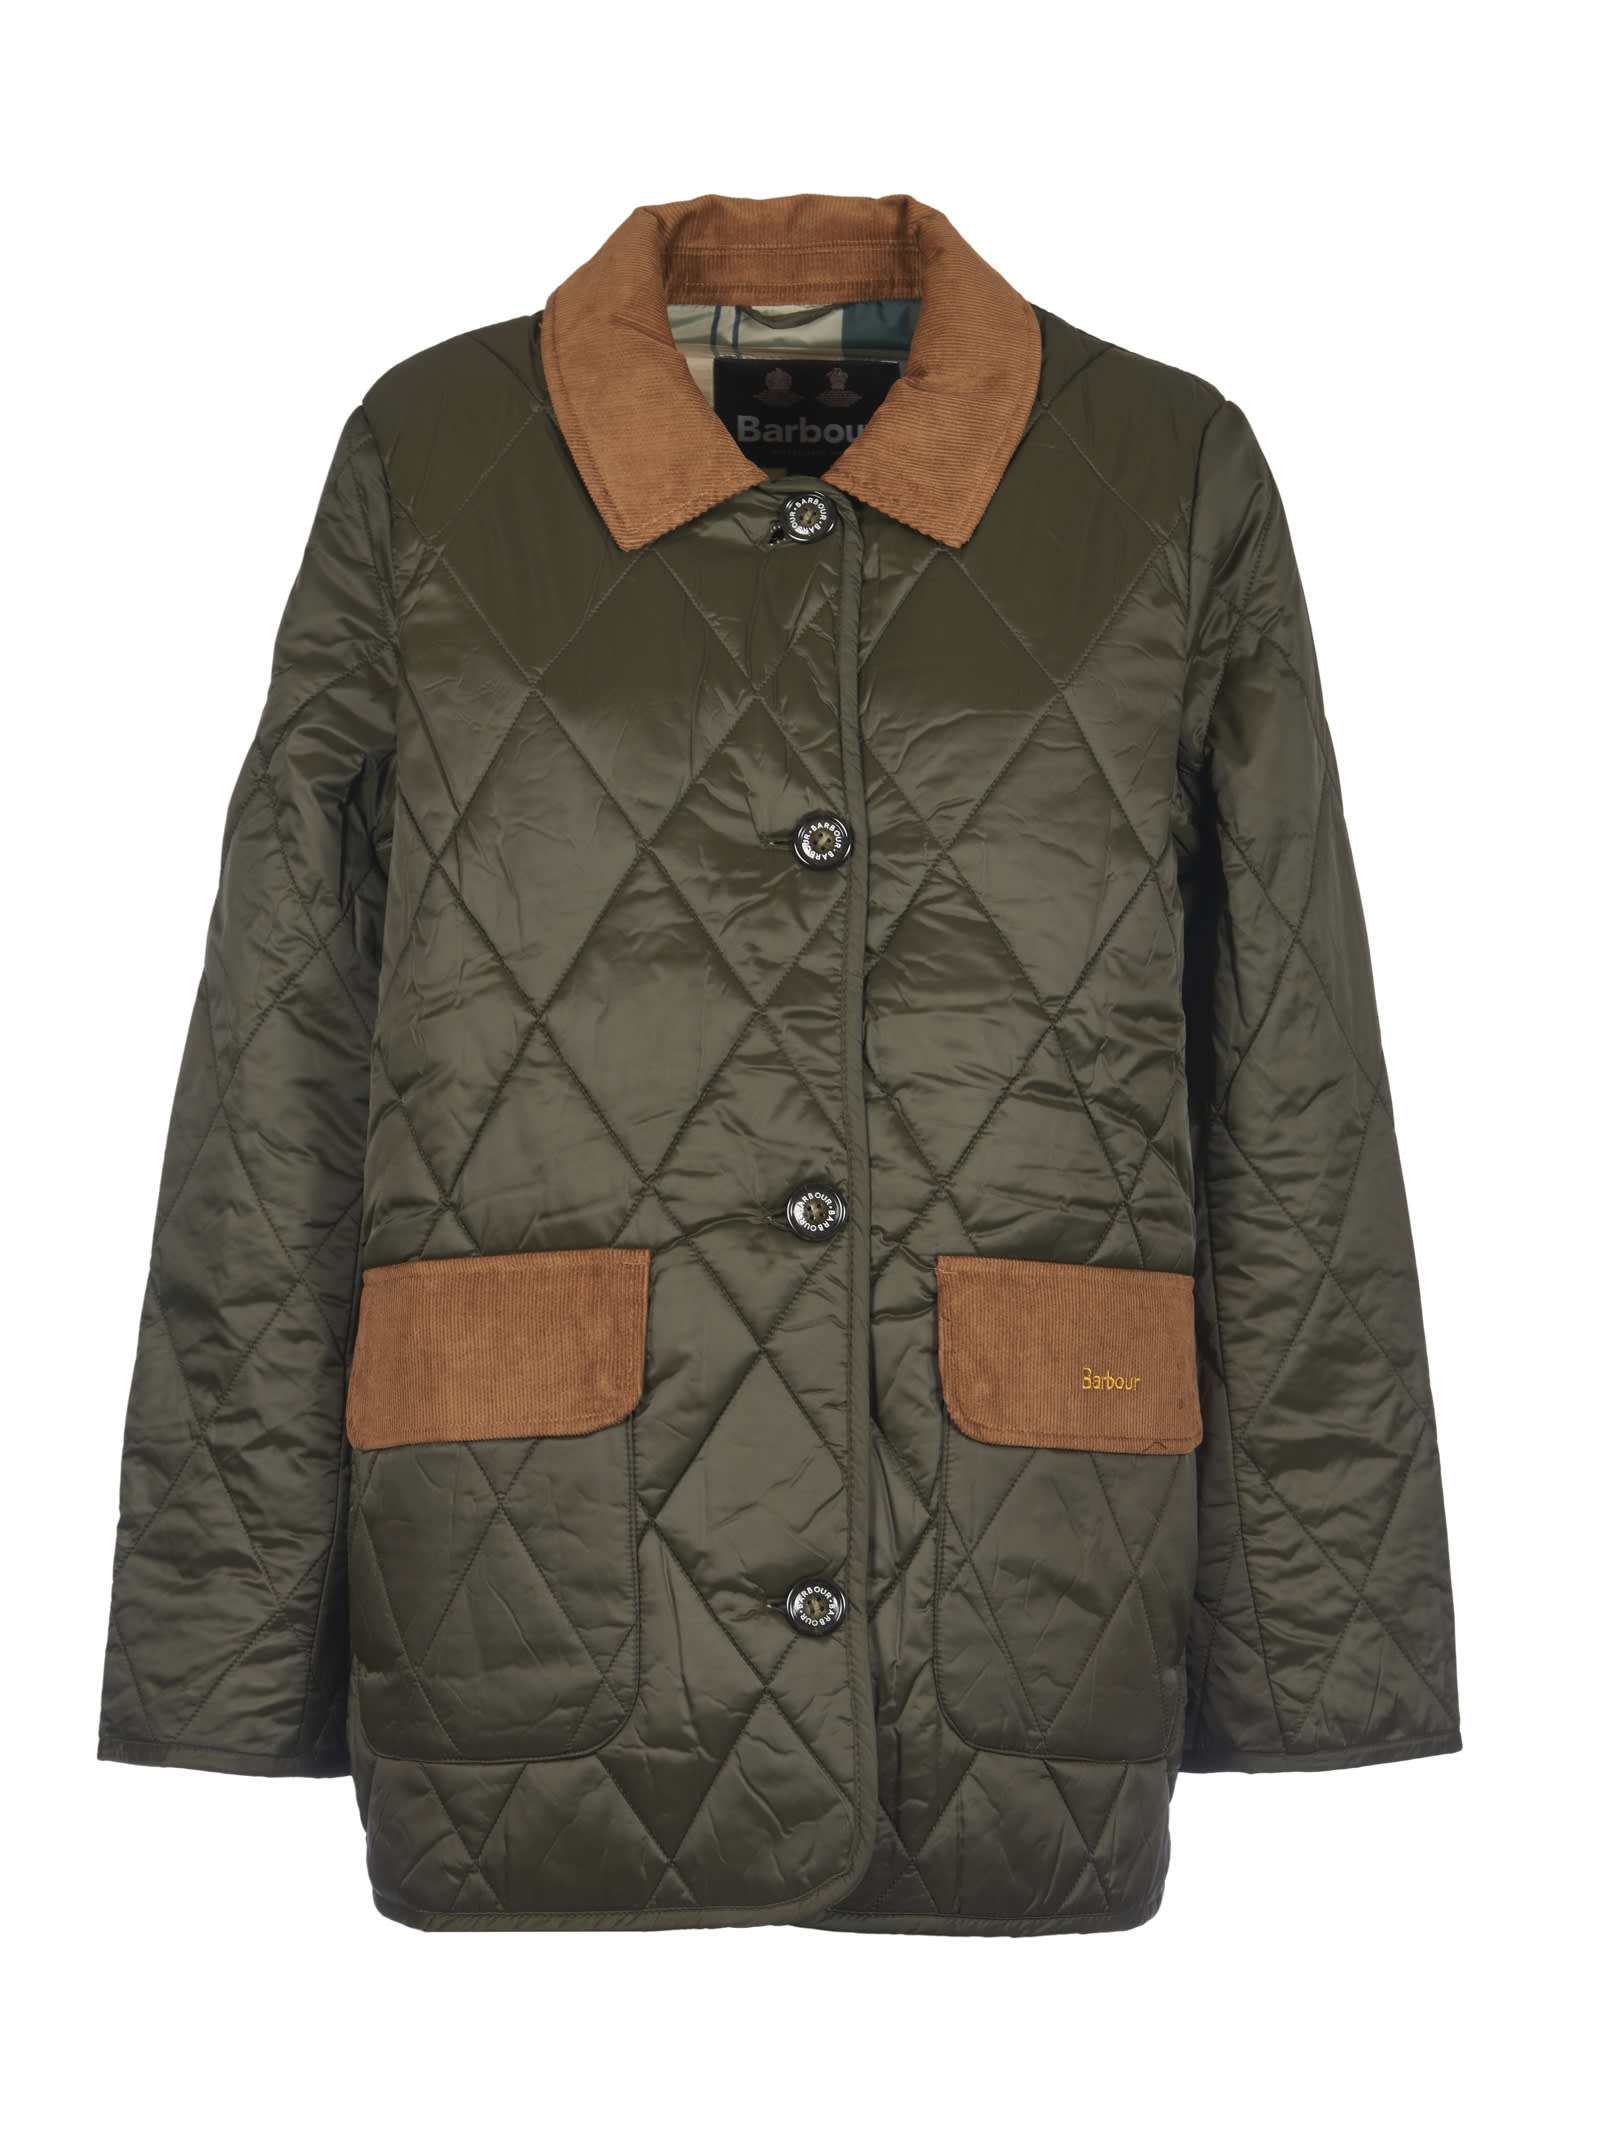 BARBOUR QUILTED JACKET BY BARBOUR